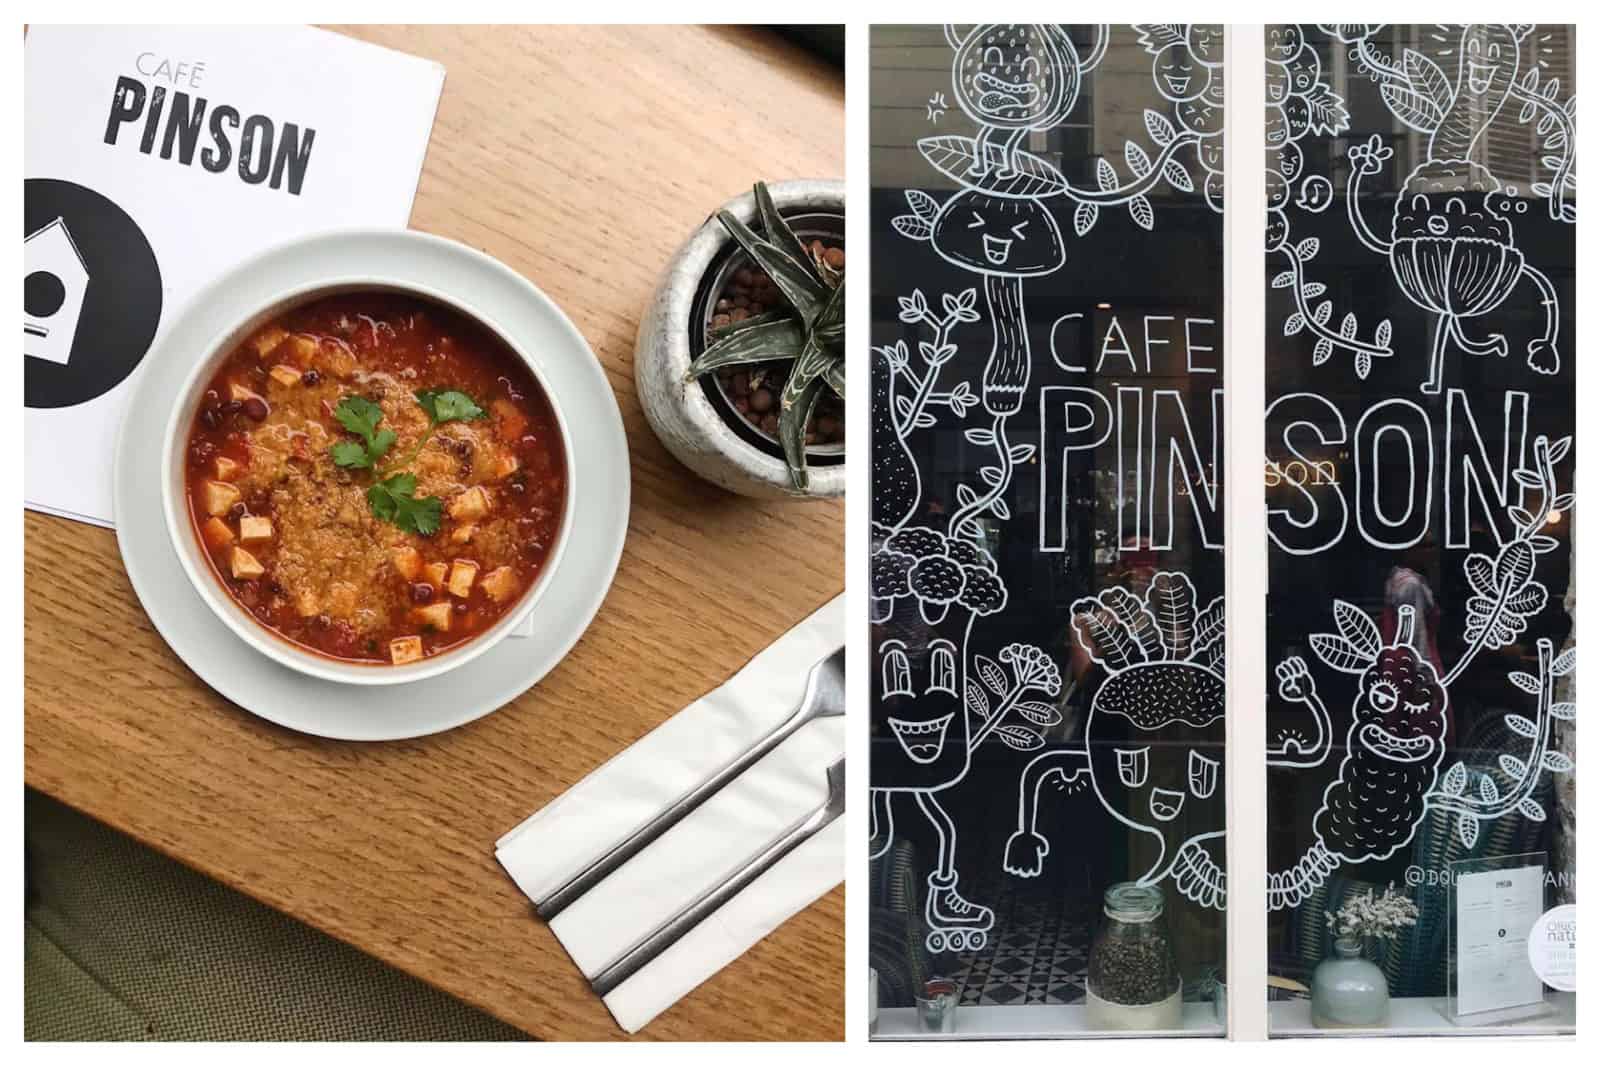 One of the best places to go for a gluten-free lunch in Paris is Café Pinson in the Marais, and we love their vegetable soups (left) and fun décor like the hand-painted veggie figures on the window (right).